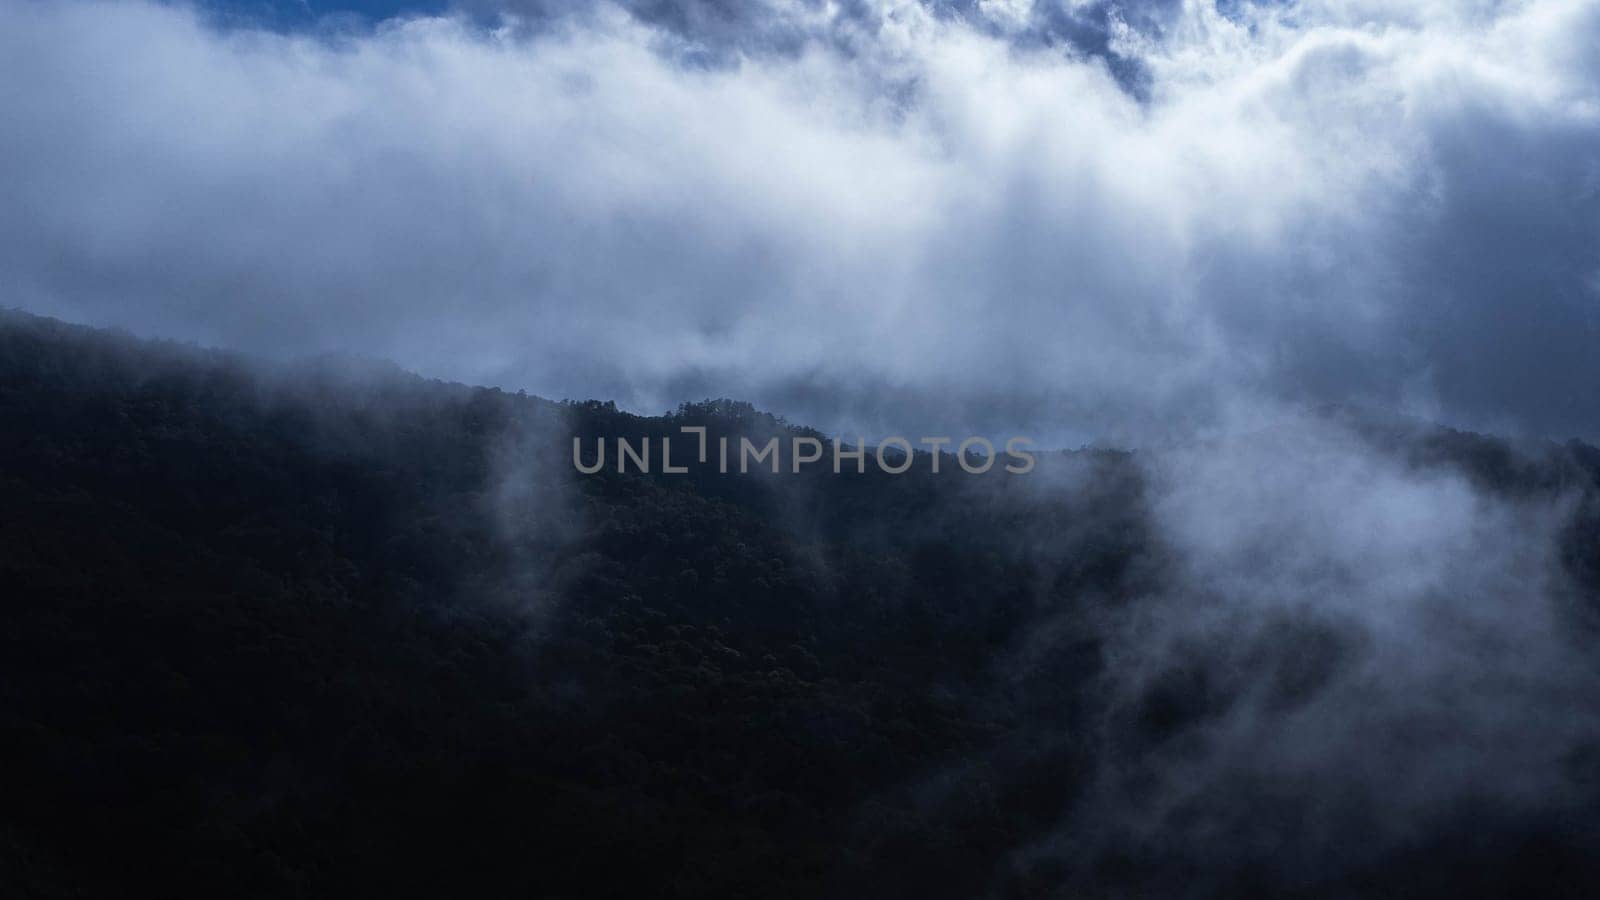 Aerial view of the trees in the valley with fog in the morning. Landscape of misty valley and mountain clouds in thailand. The dawn of the mountains with the sea of mist.